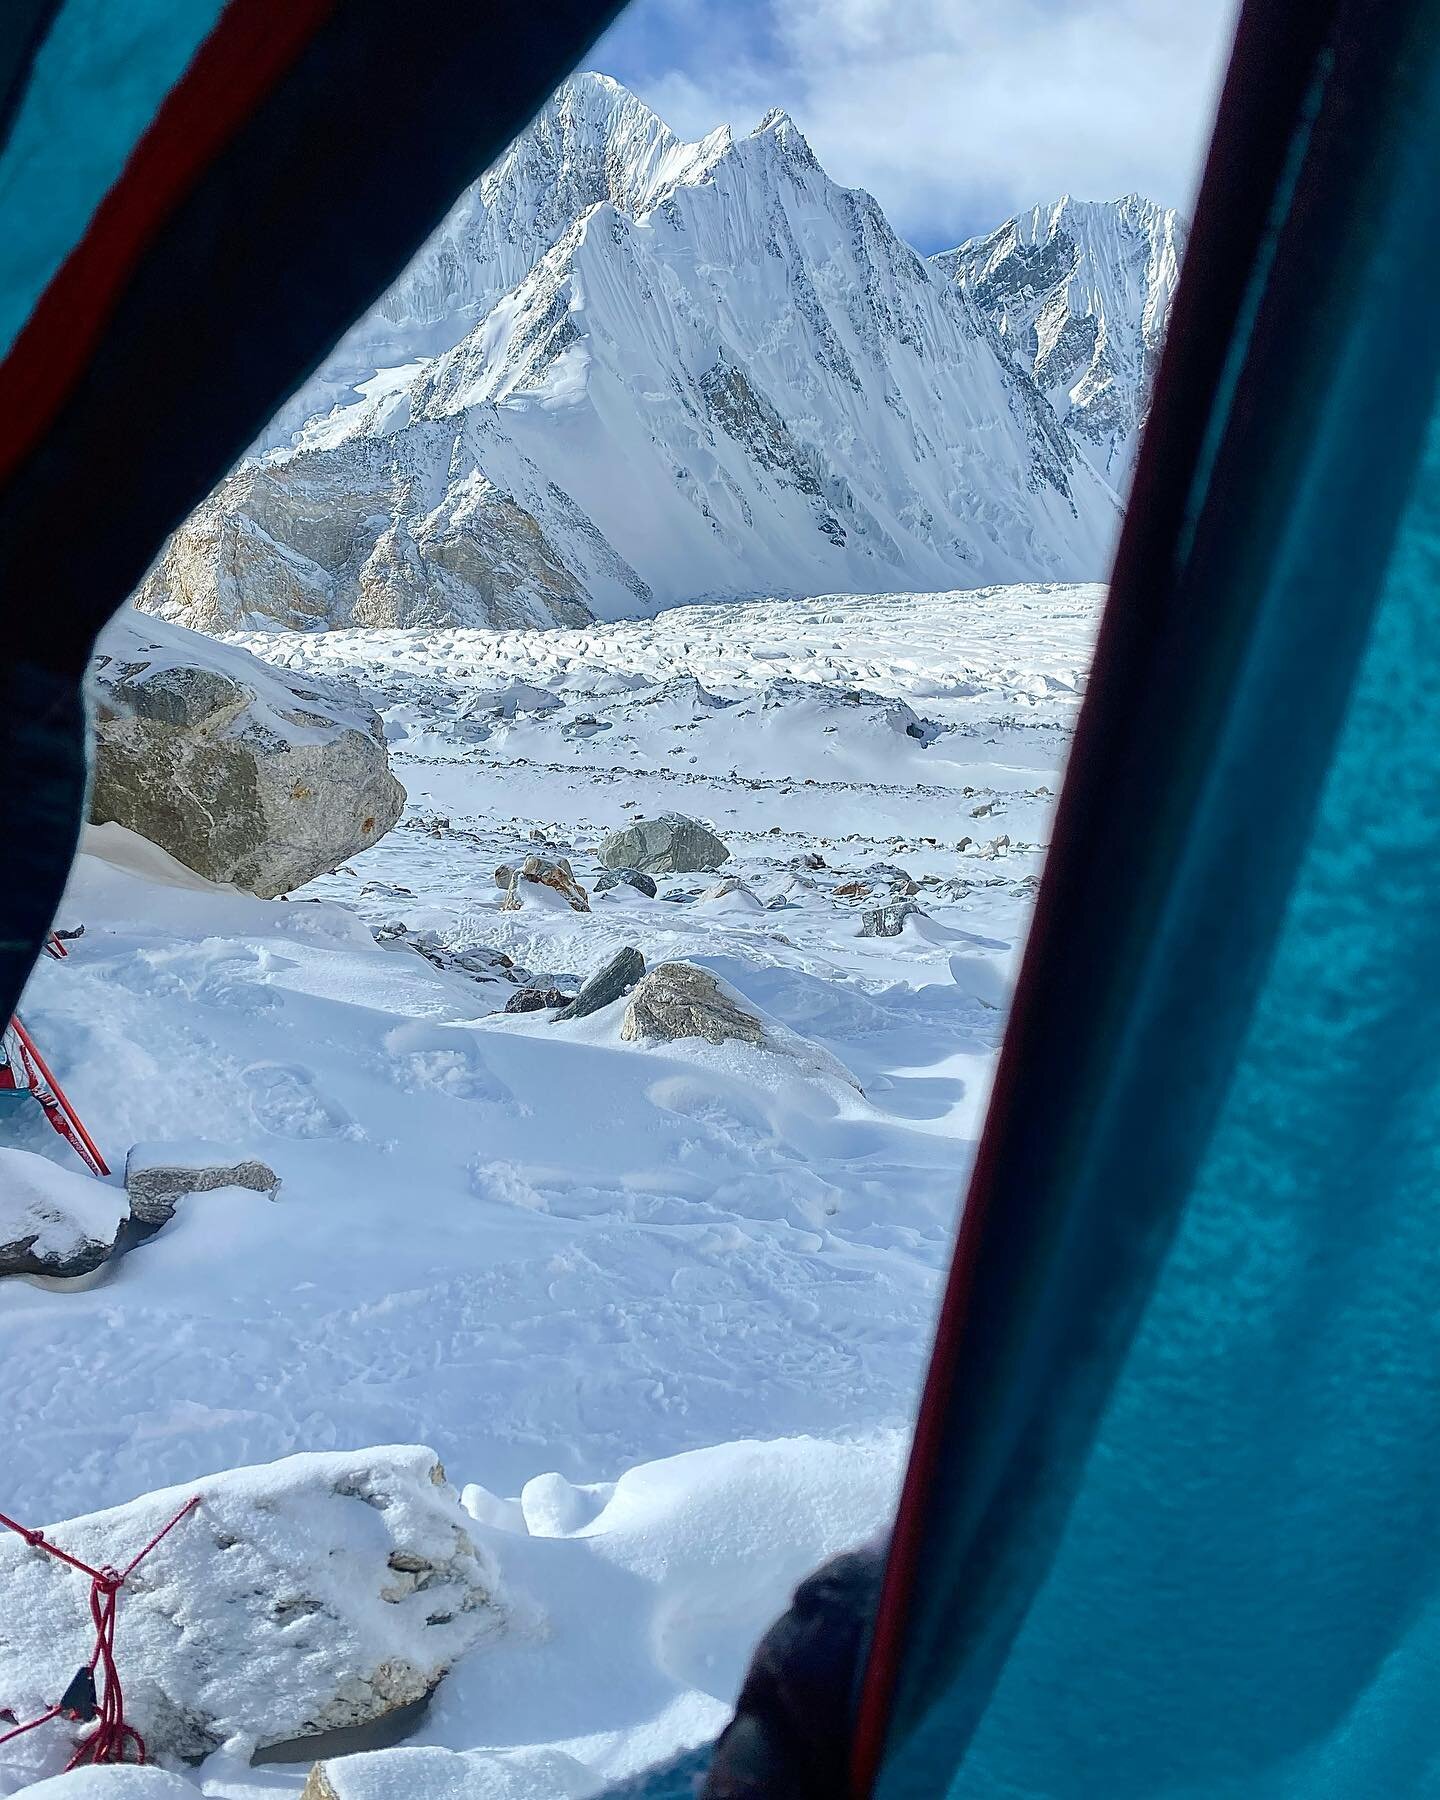 MORNING VIEWS - It&rsquo;s been nice being back home sleeping in my own bed, but I&rsquo;m not going to lie I kinda miss waking up to this view outside my tent each morning.

Not just K2 but the entire Karakoram is truly one of the most magnificent p